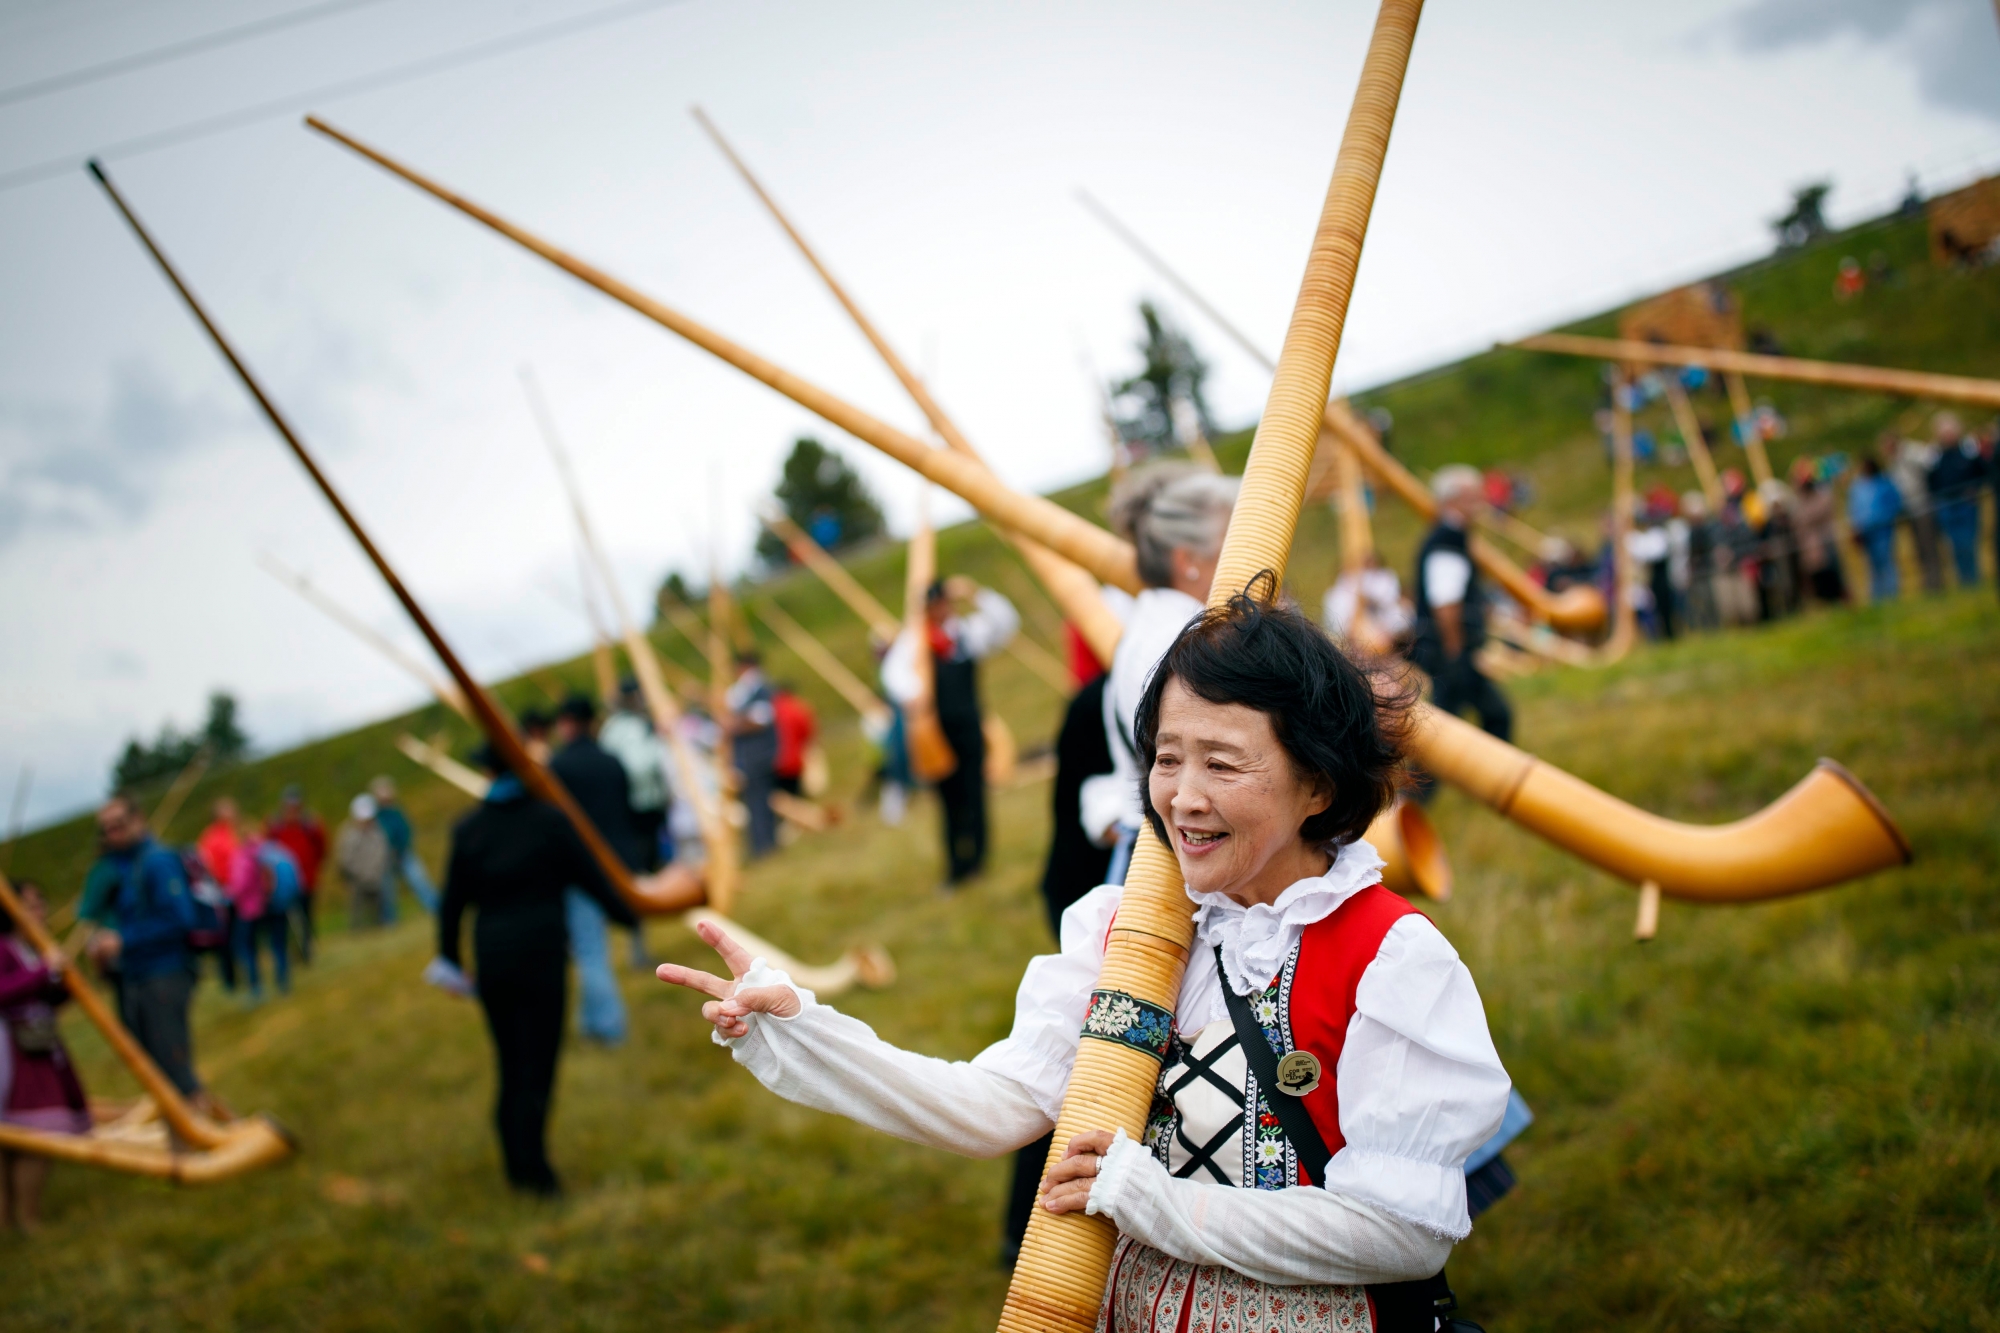 A Japanese alphorn player leaves after taking part in a group performance during the 16th international alphorn festival in Nendaz, south western Switzerland, Sunday July 23 2017. Over 180 alphorn players performed in Nendaz over the three day-long festival. (KEYSTONE/Valentin Flauraud) SWITZERLAND ALHORN FESTIVAL